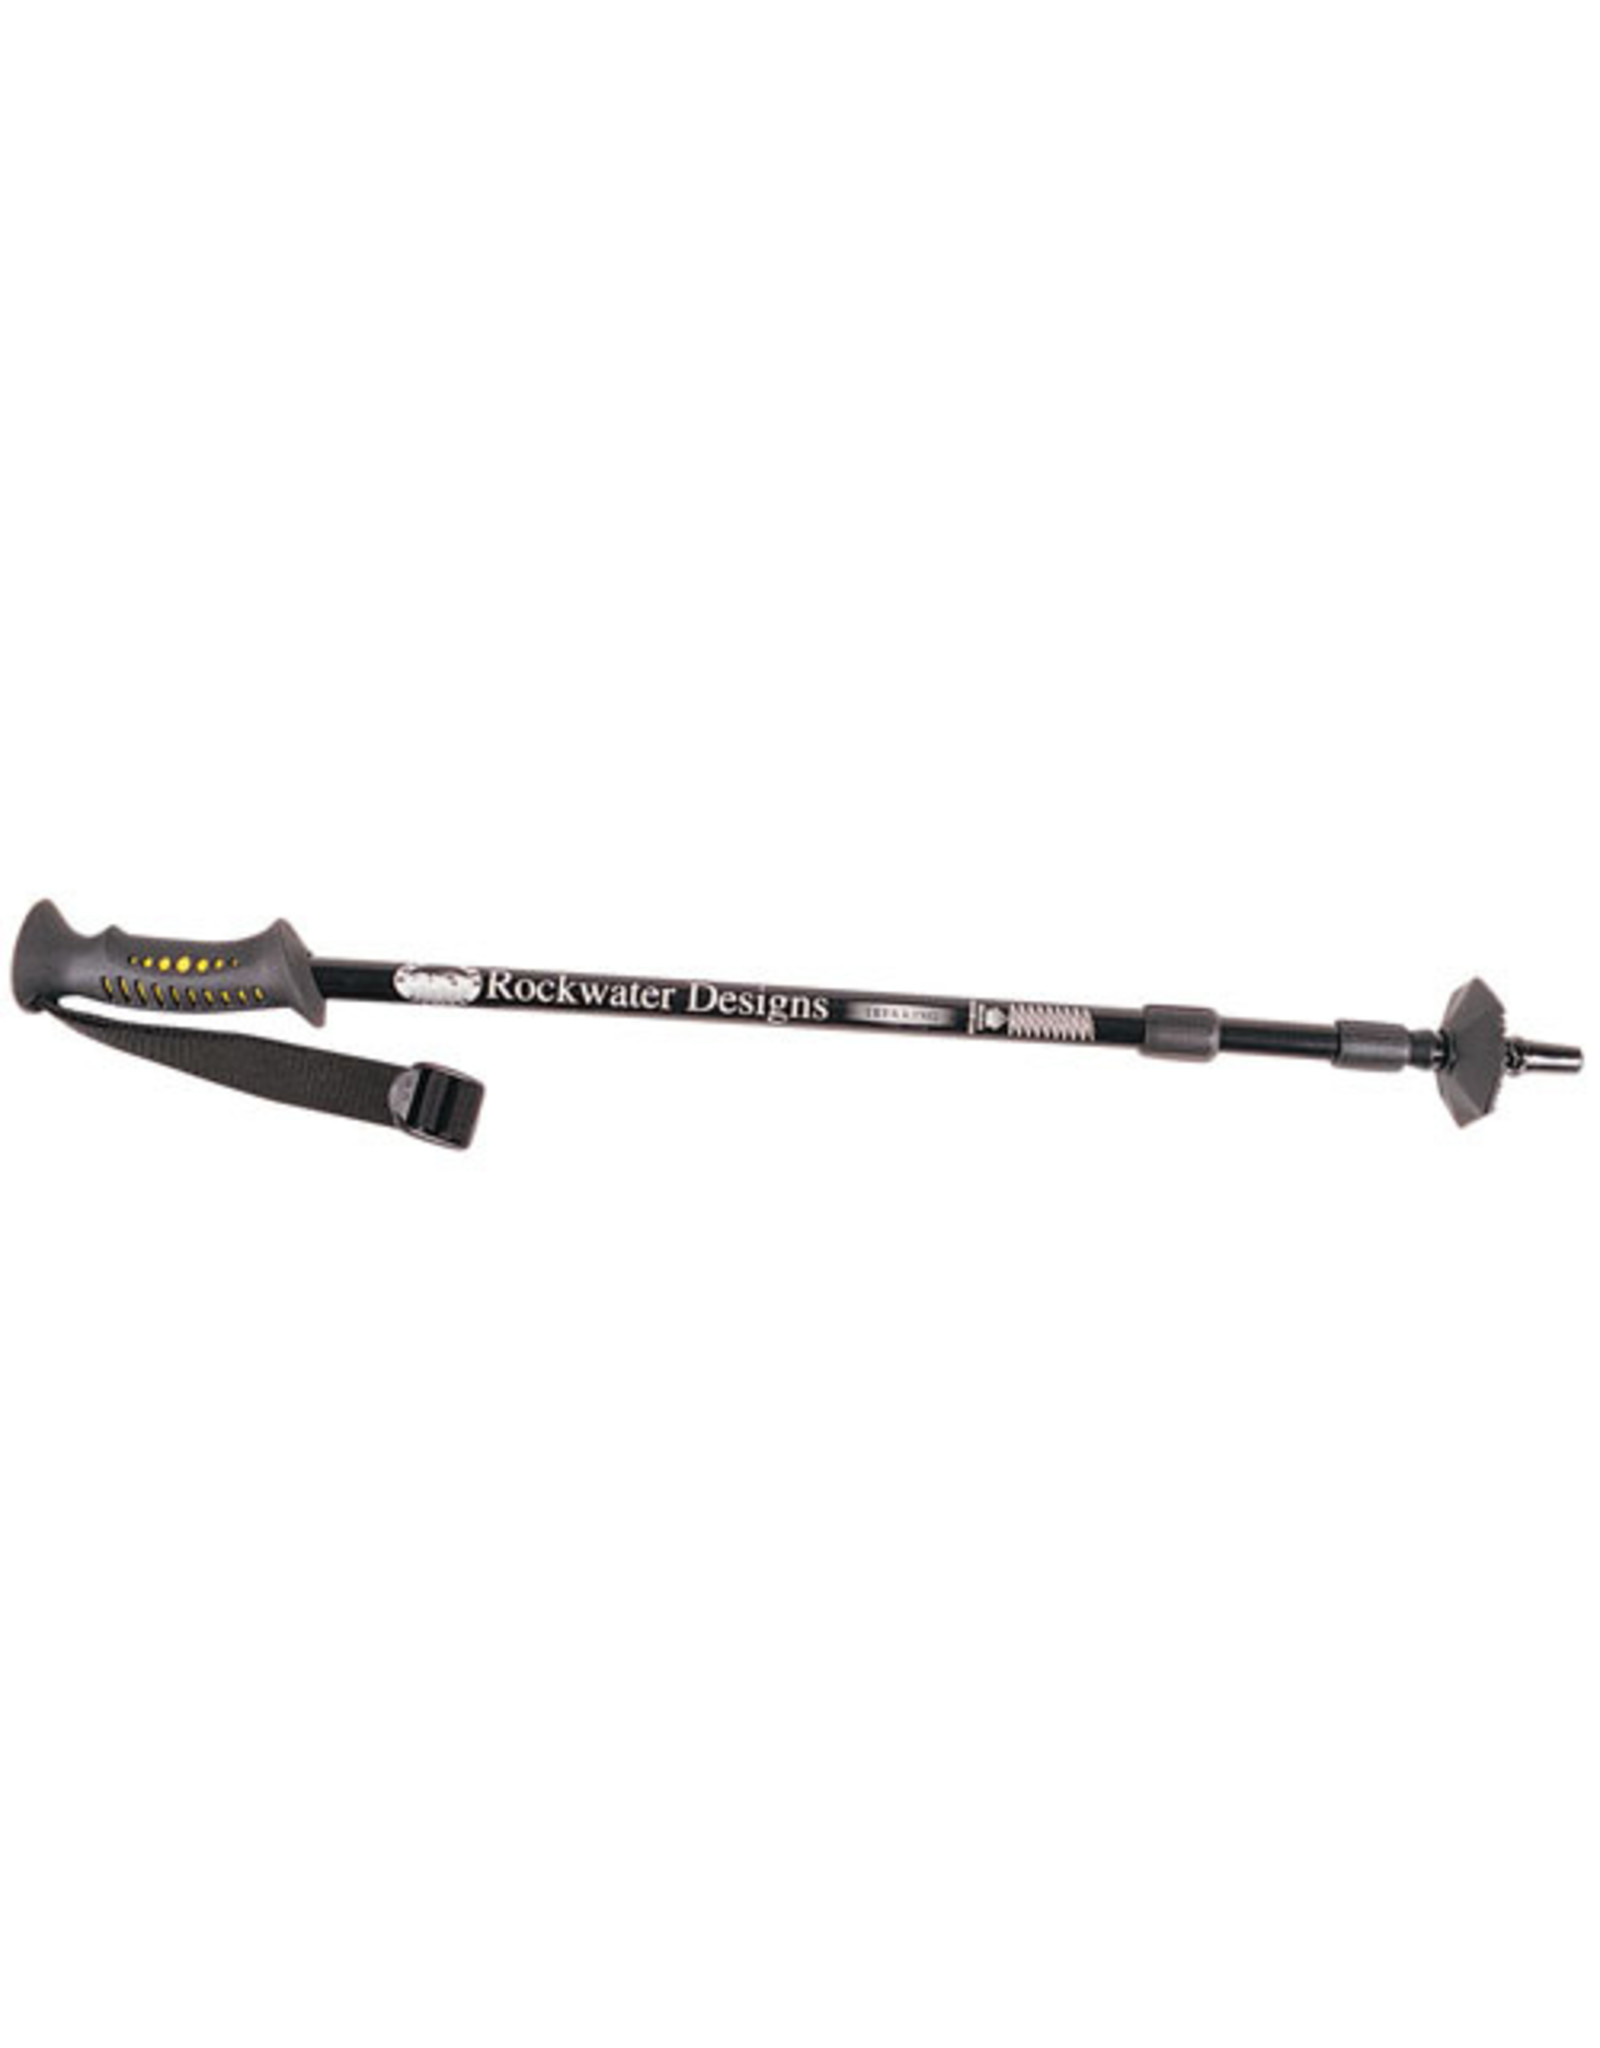 WORLD FAMOUS SALES TREKING POLE WITH RUBBER GRIP 7690